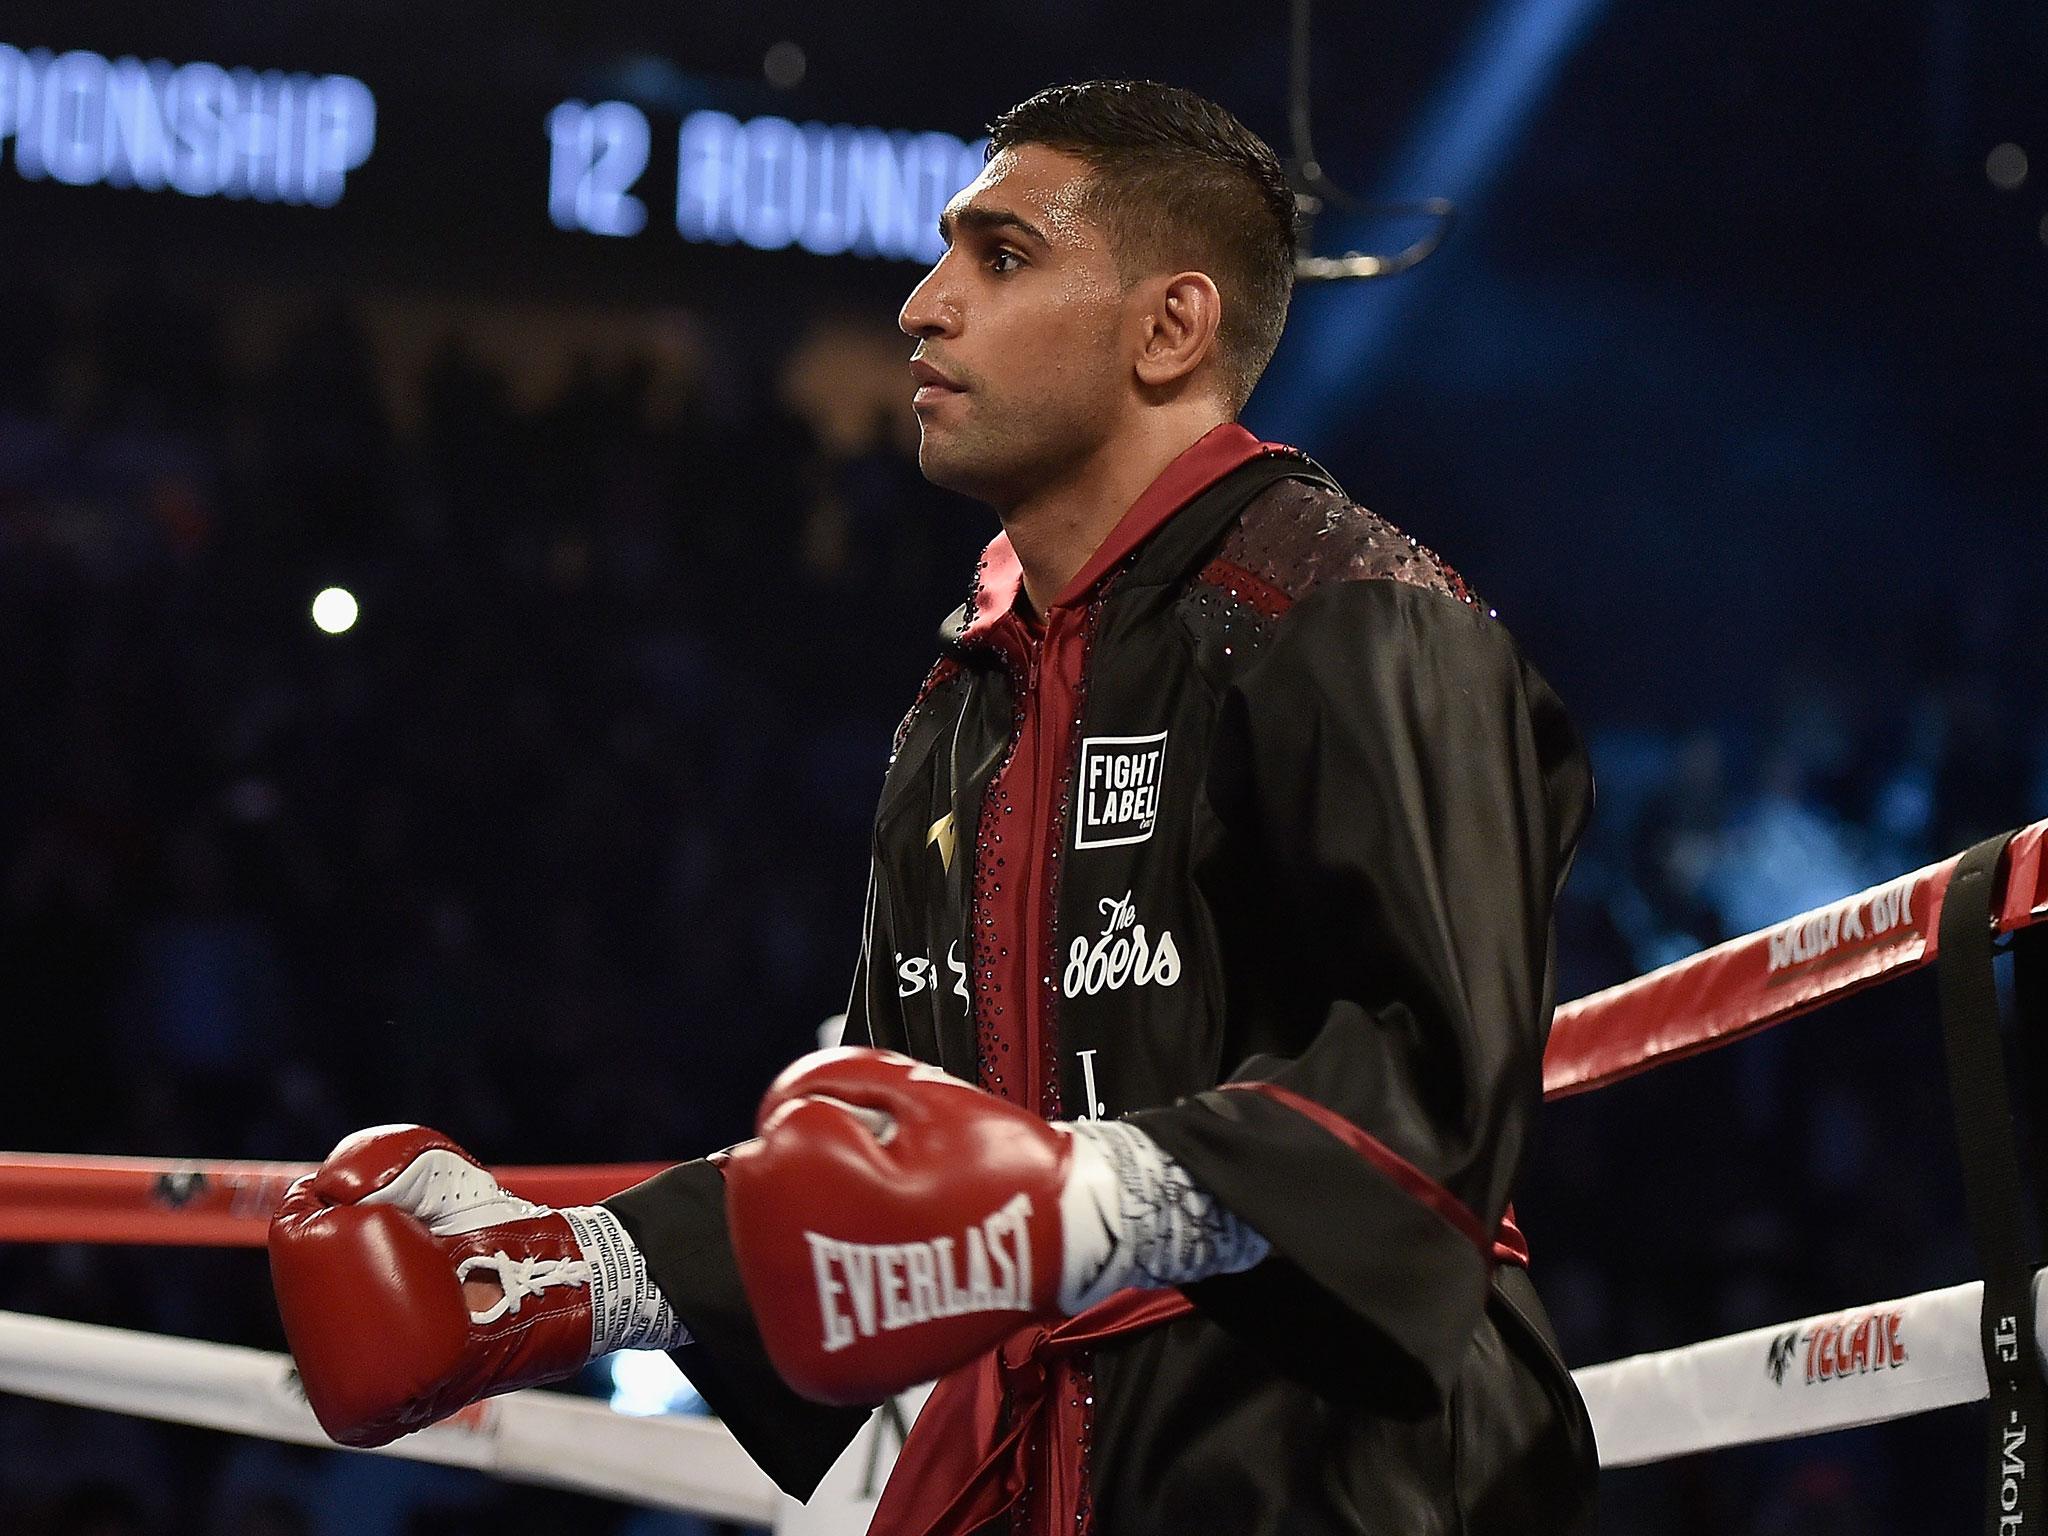 Khan prior to his middleweight title fight against Canelo Alvarez